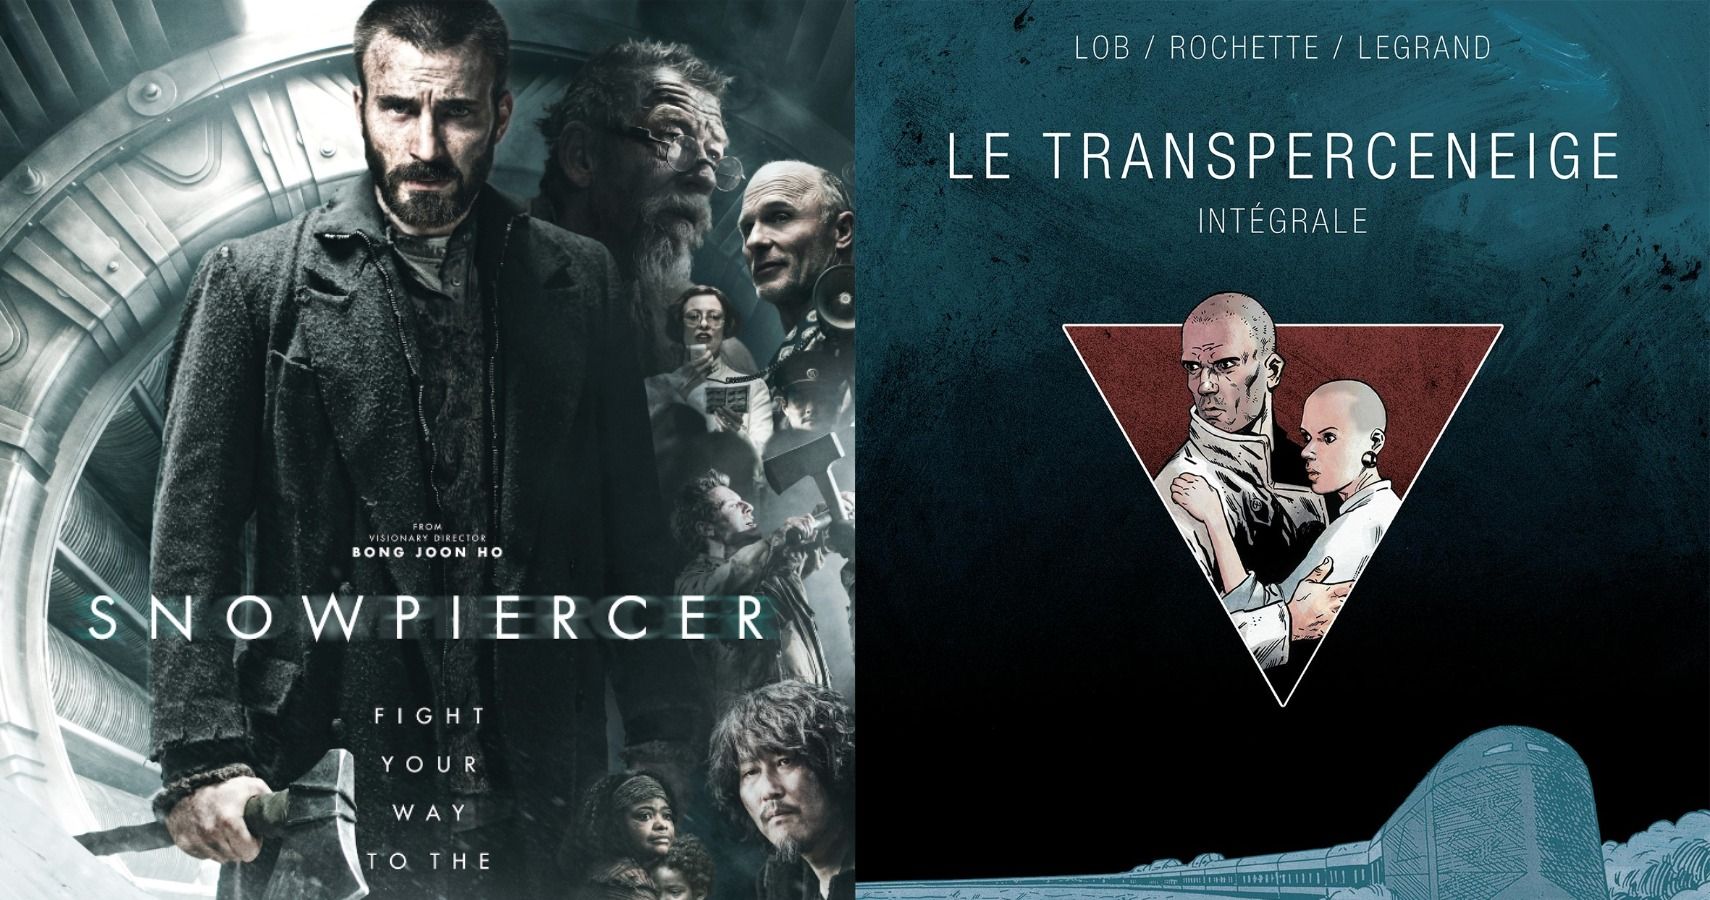 Snowpiercer 10 Biggest Differences Between The Graphic Novel and Movie